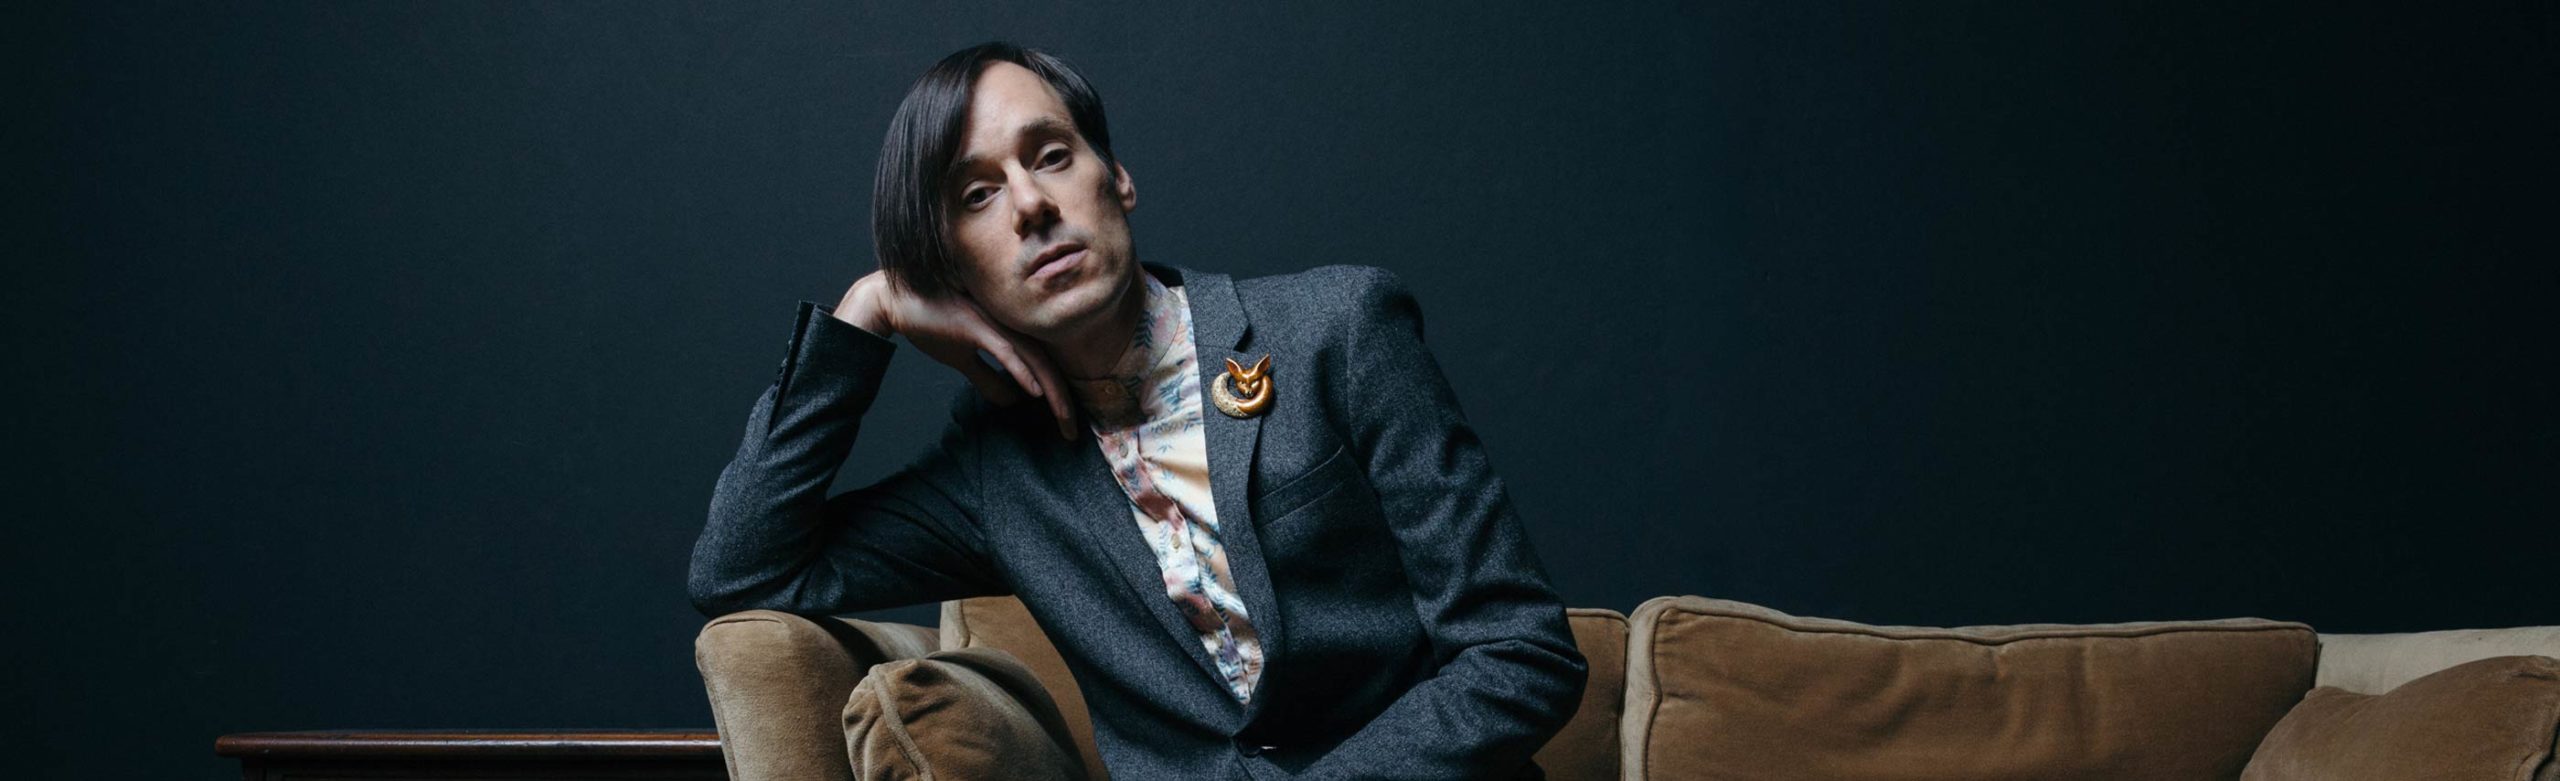 Neo-Psychedelia Meets Indie Pop: Of Montreal Will Return to Missoula Image